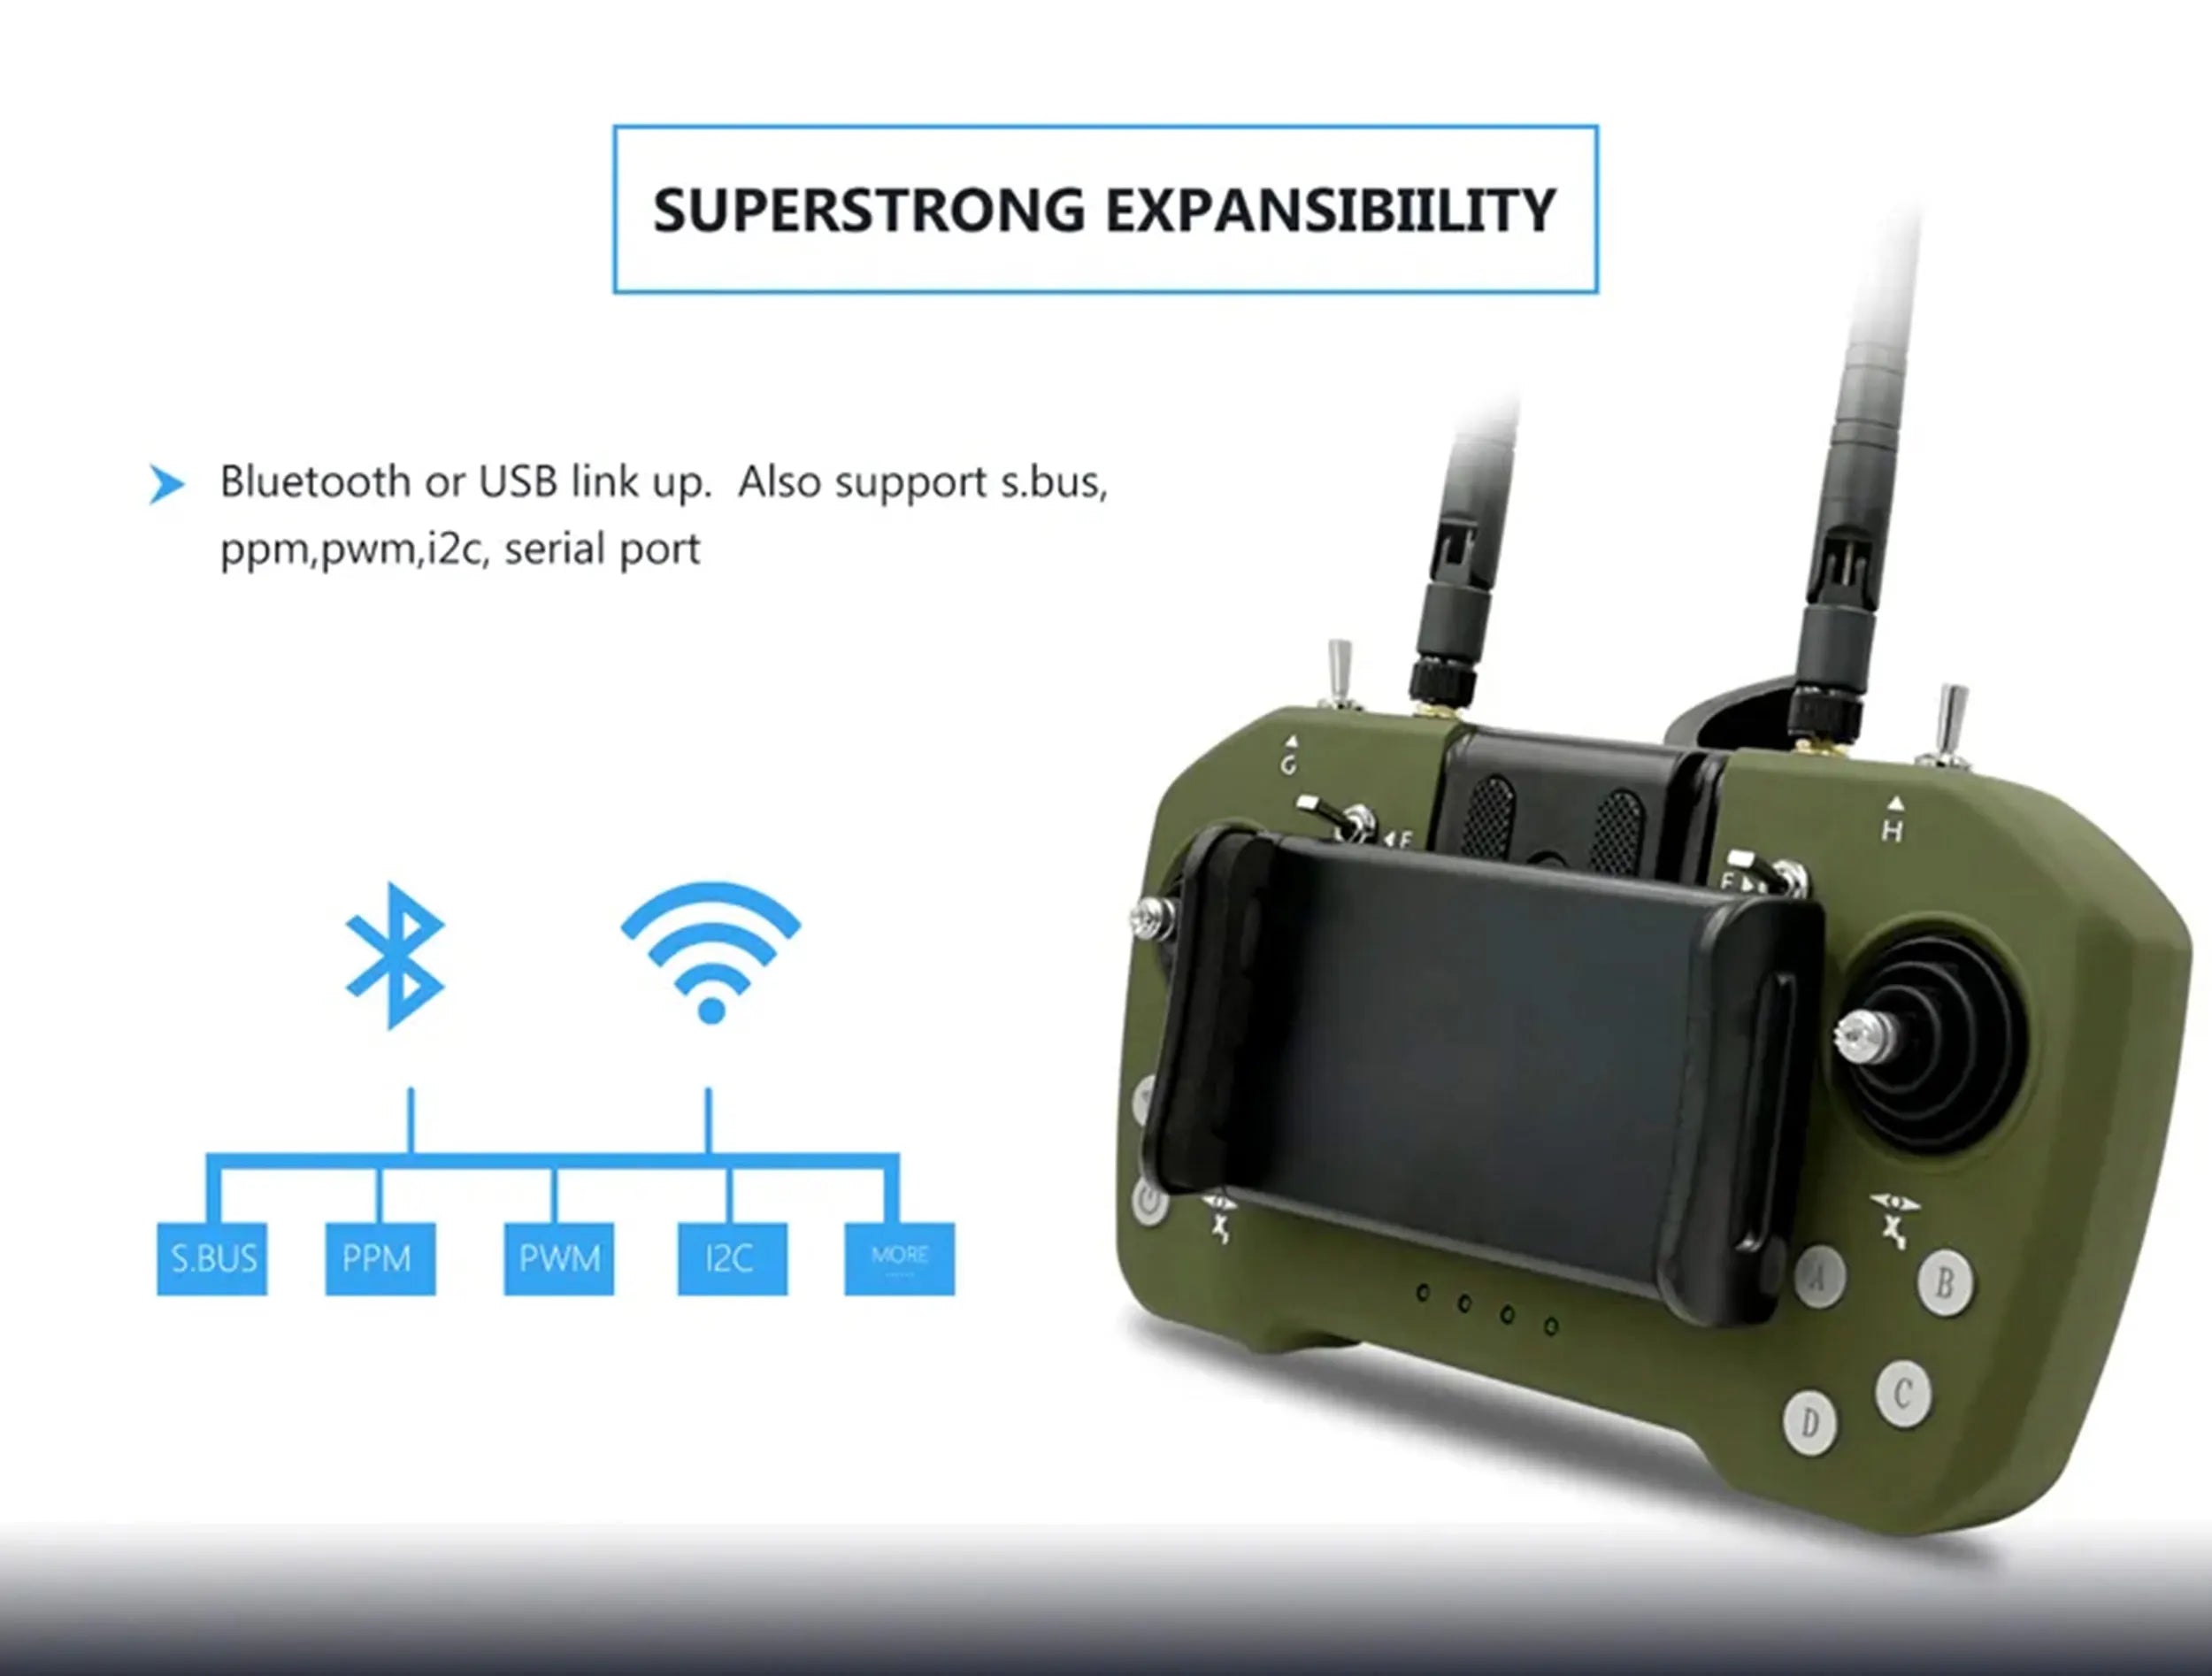 Skydroid M12L, Wireless expansion via Bluetooth or USB with multiple protocol support.